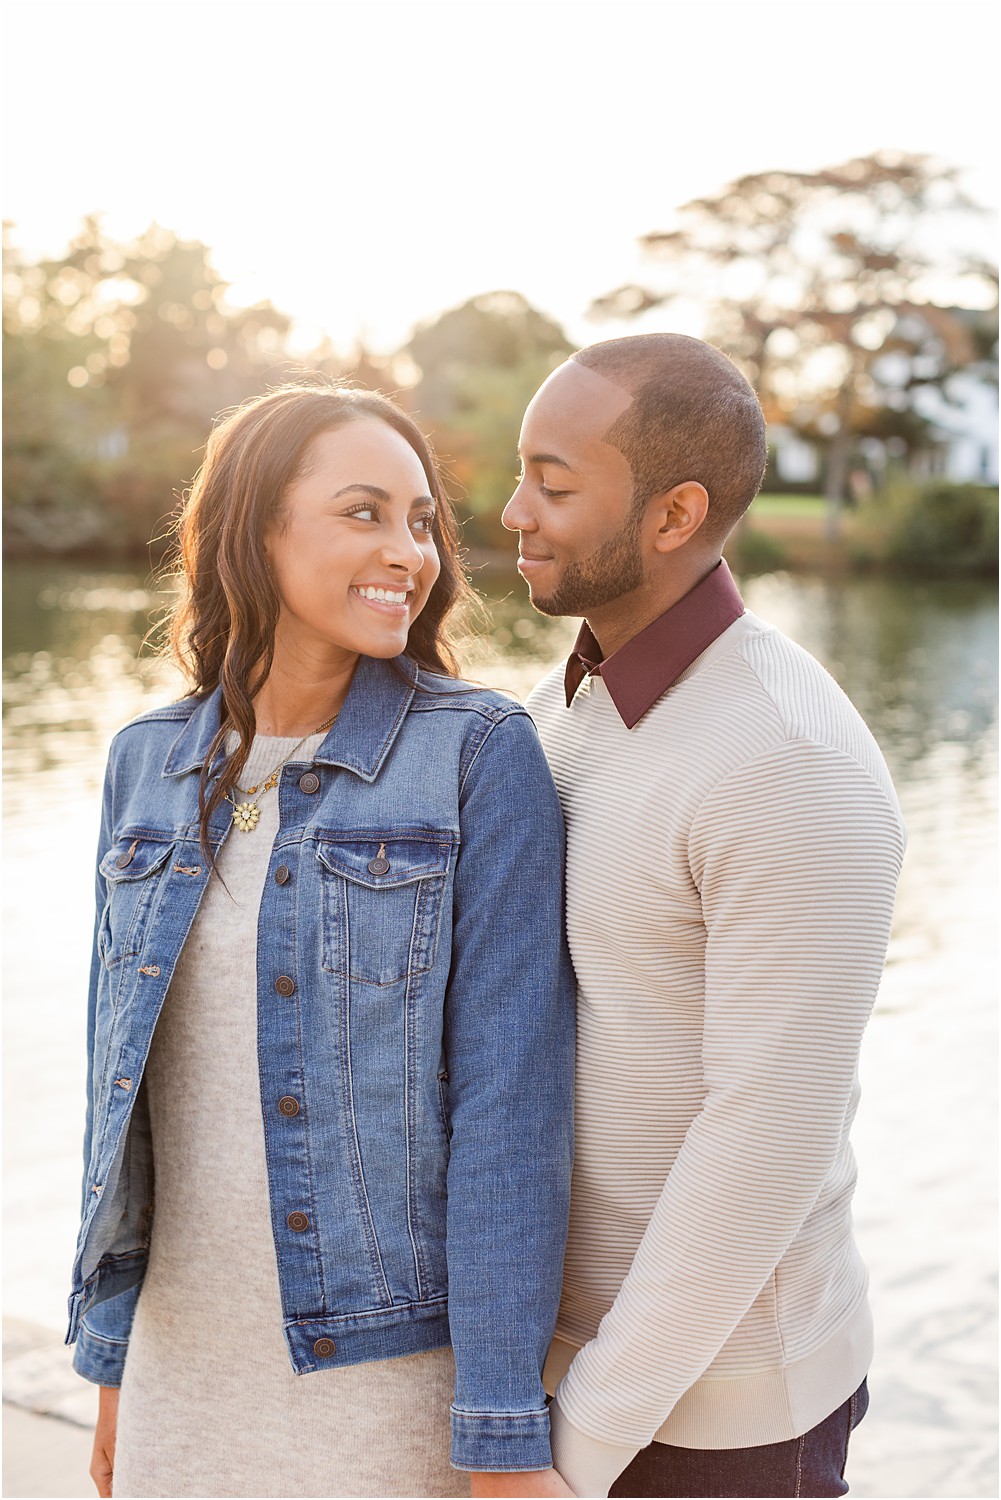 NJ fall engagement photos by the water